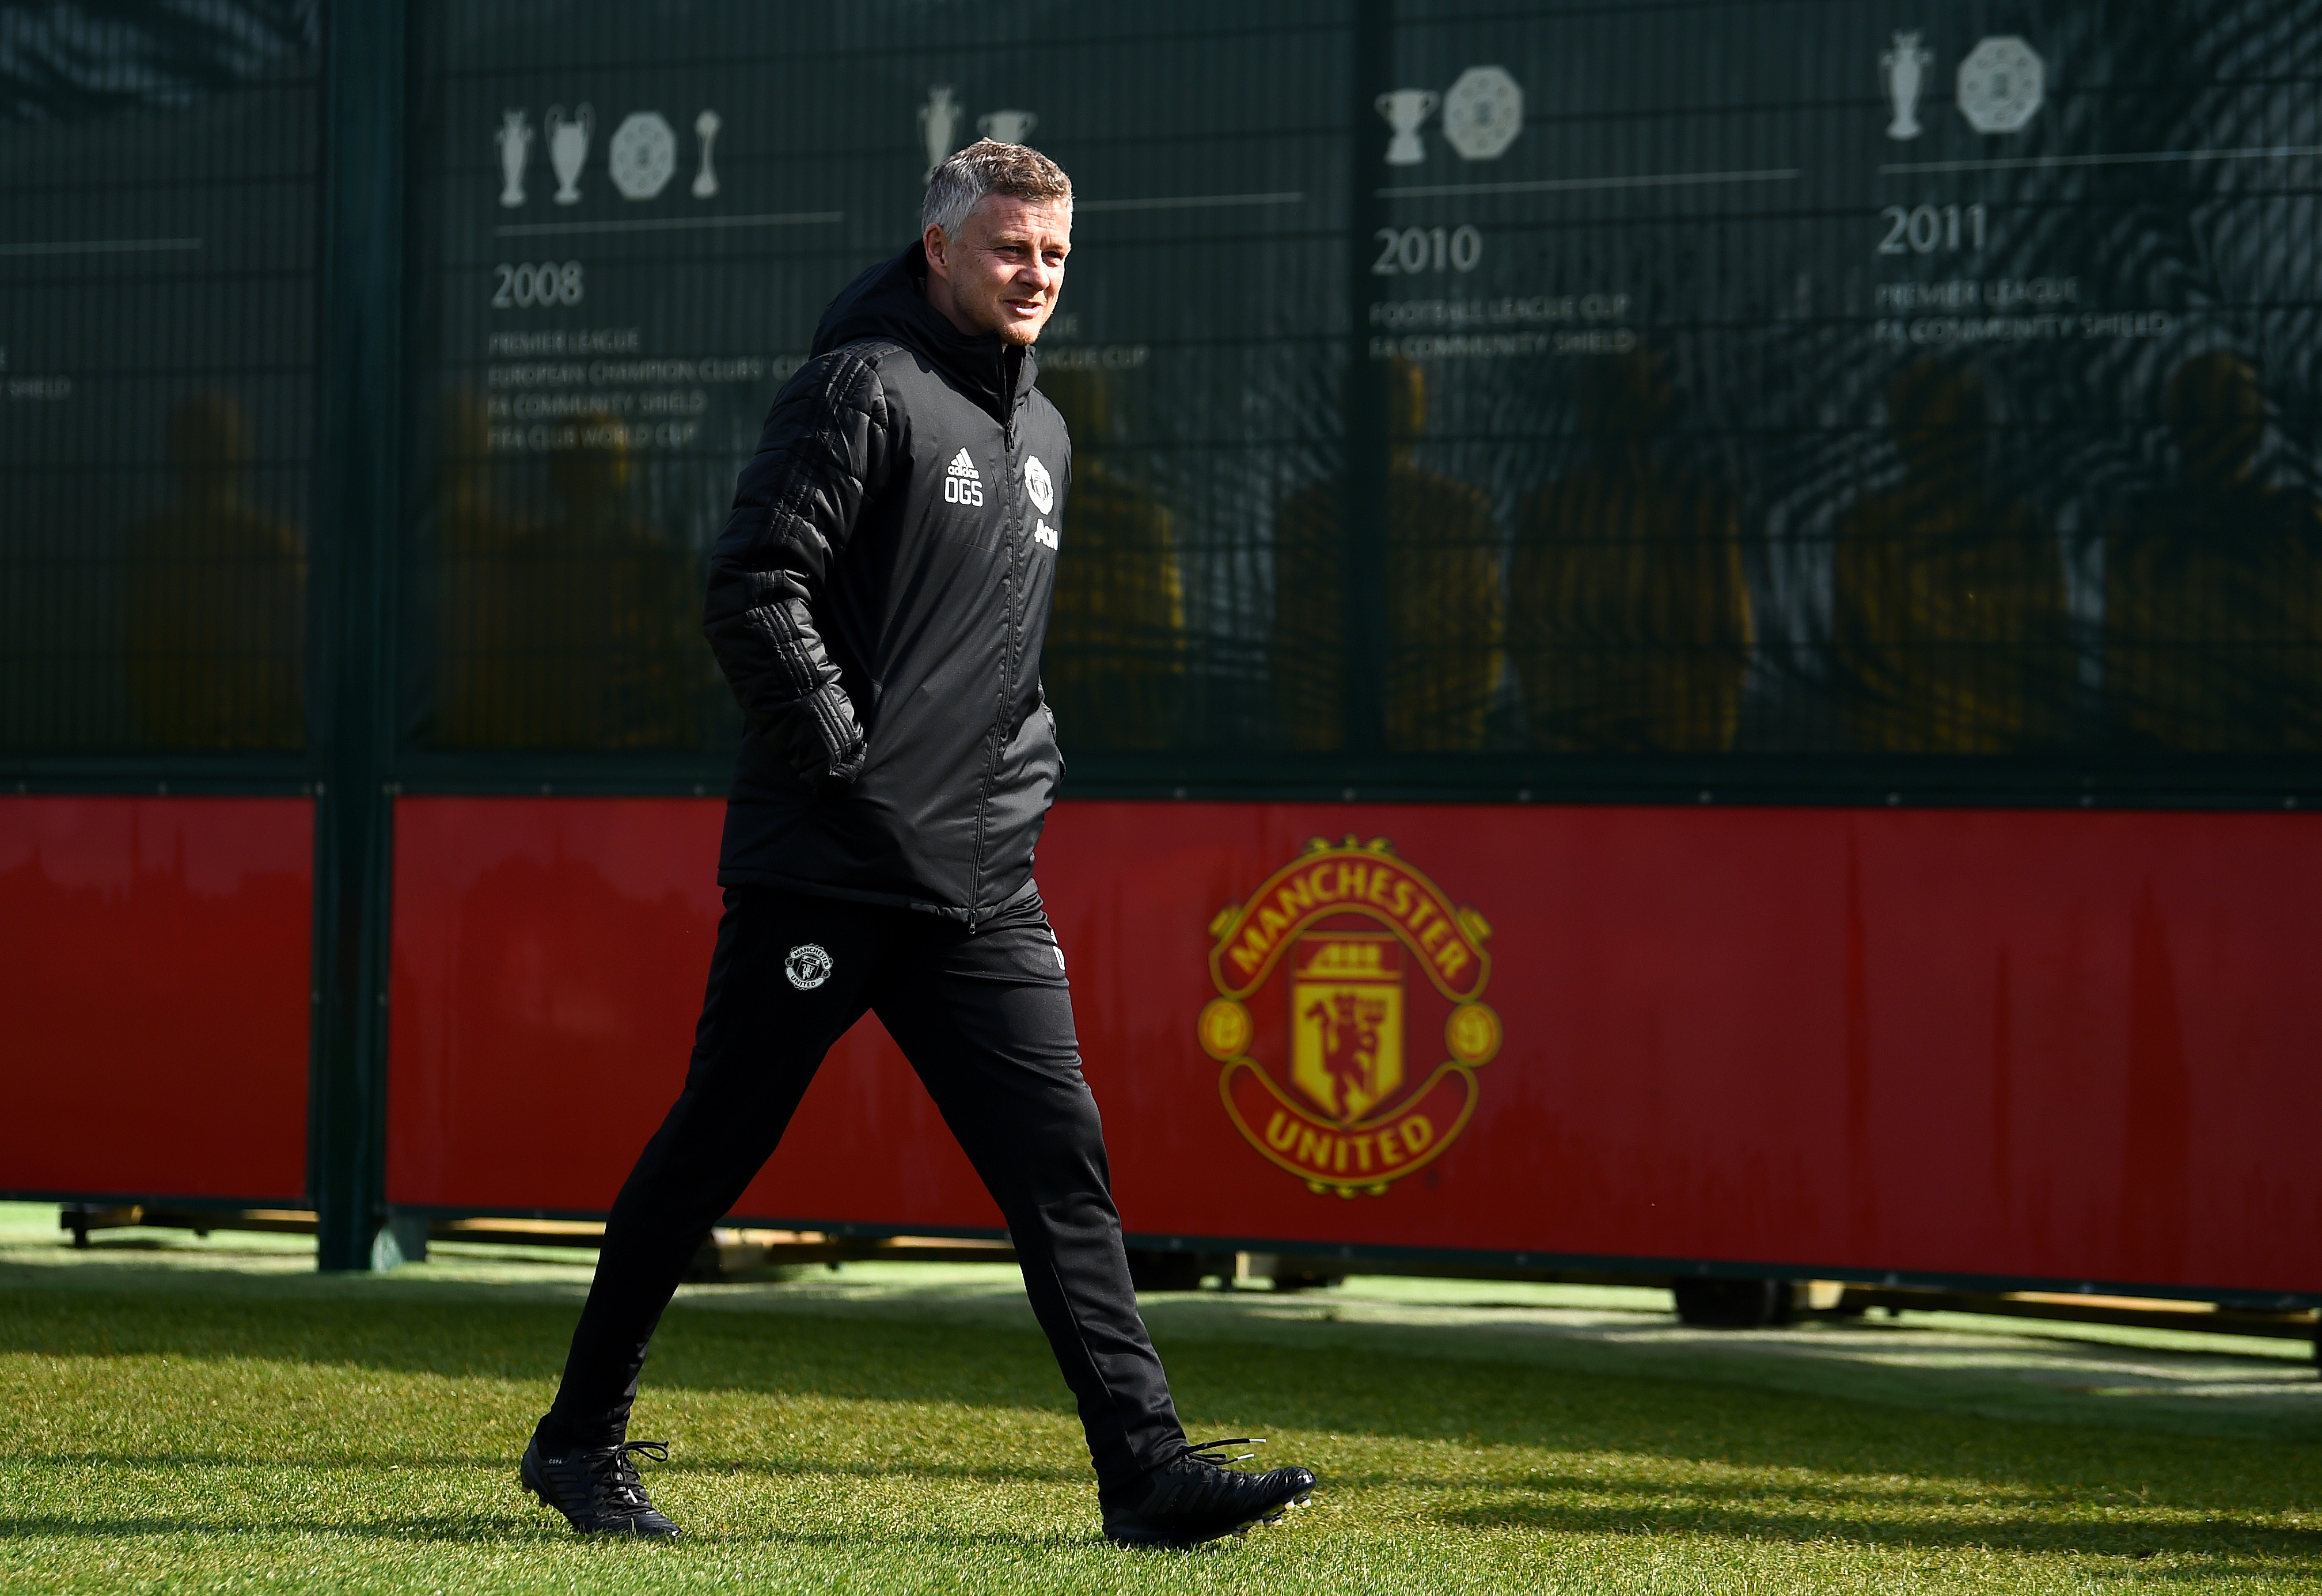 A new wave of youngsters are expected to take the field at Old Trafford for Manchester United. (Picture Courtesy - AFP/Getty Images)